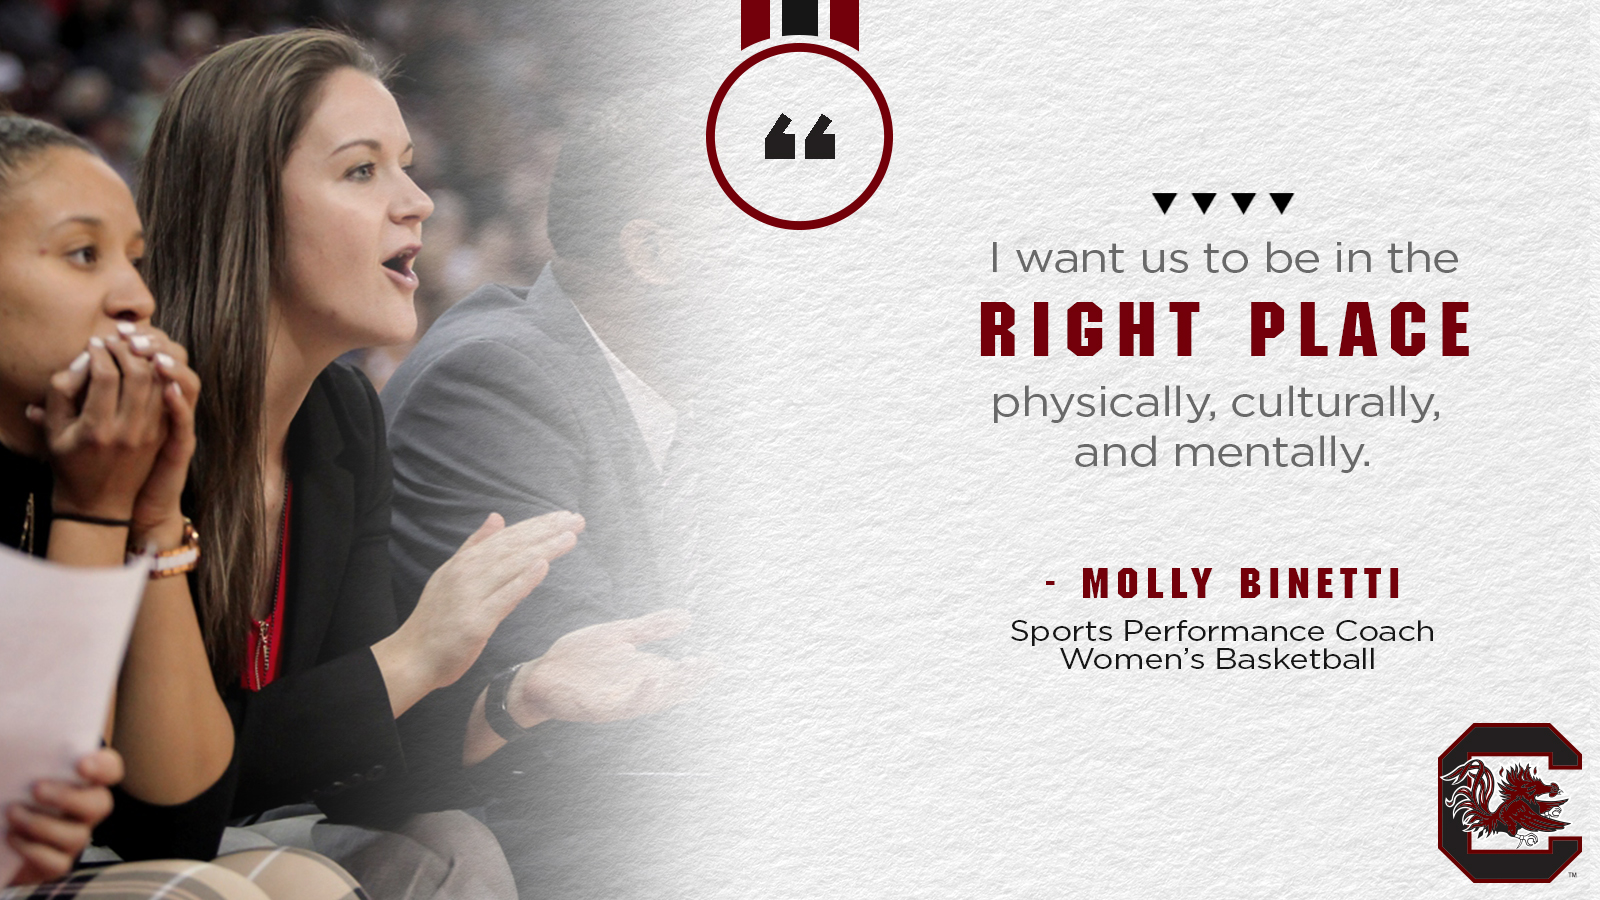 Building Relationships is Key for Binetti and Women's Basketball